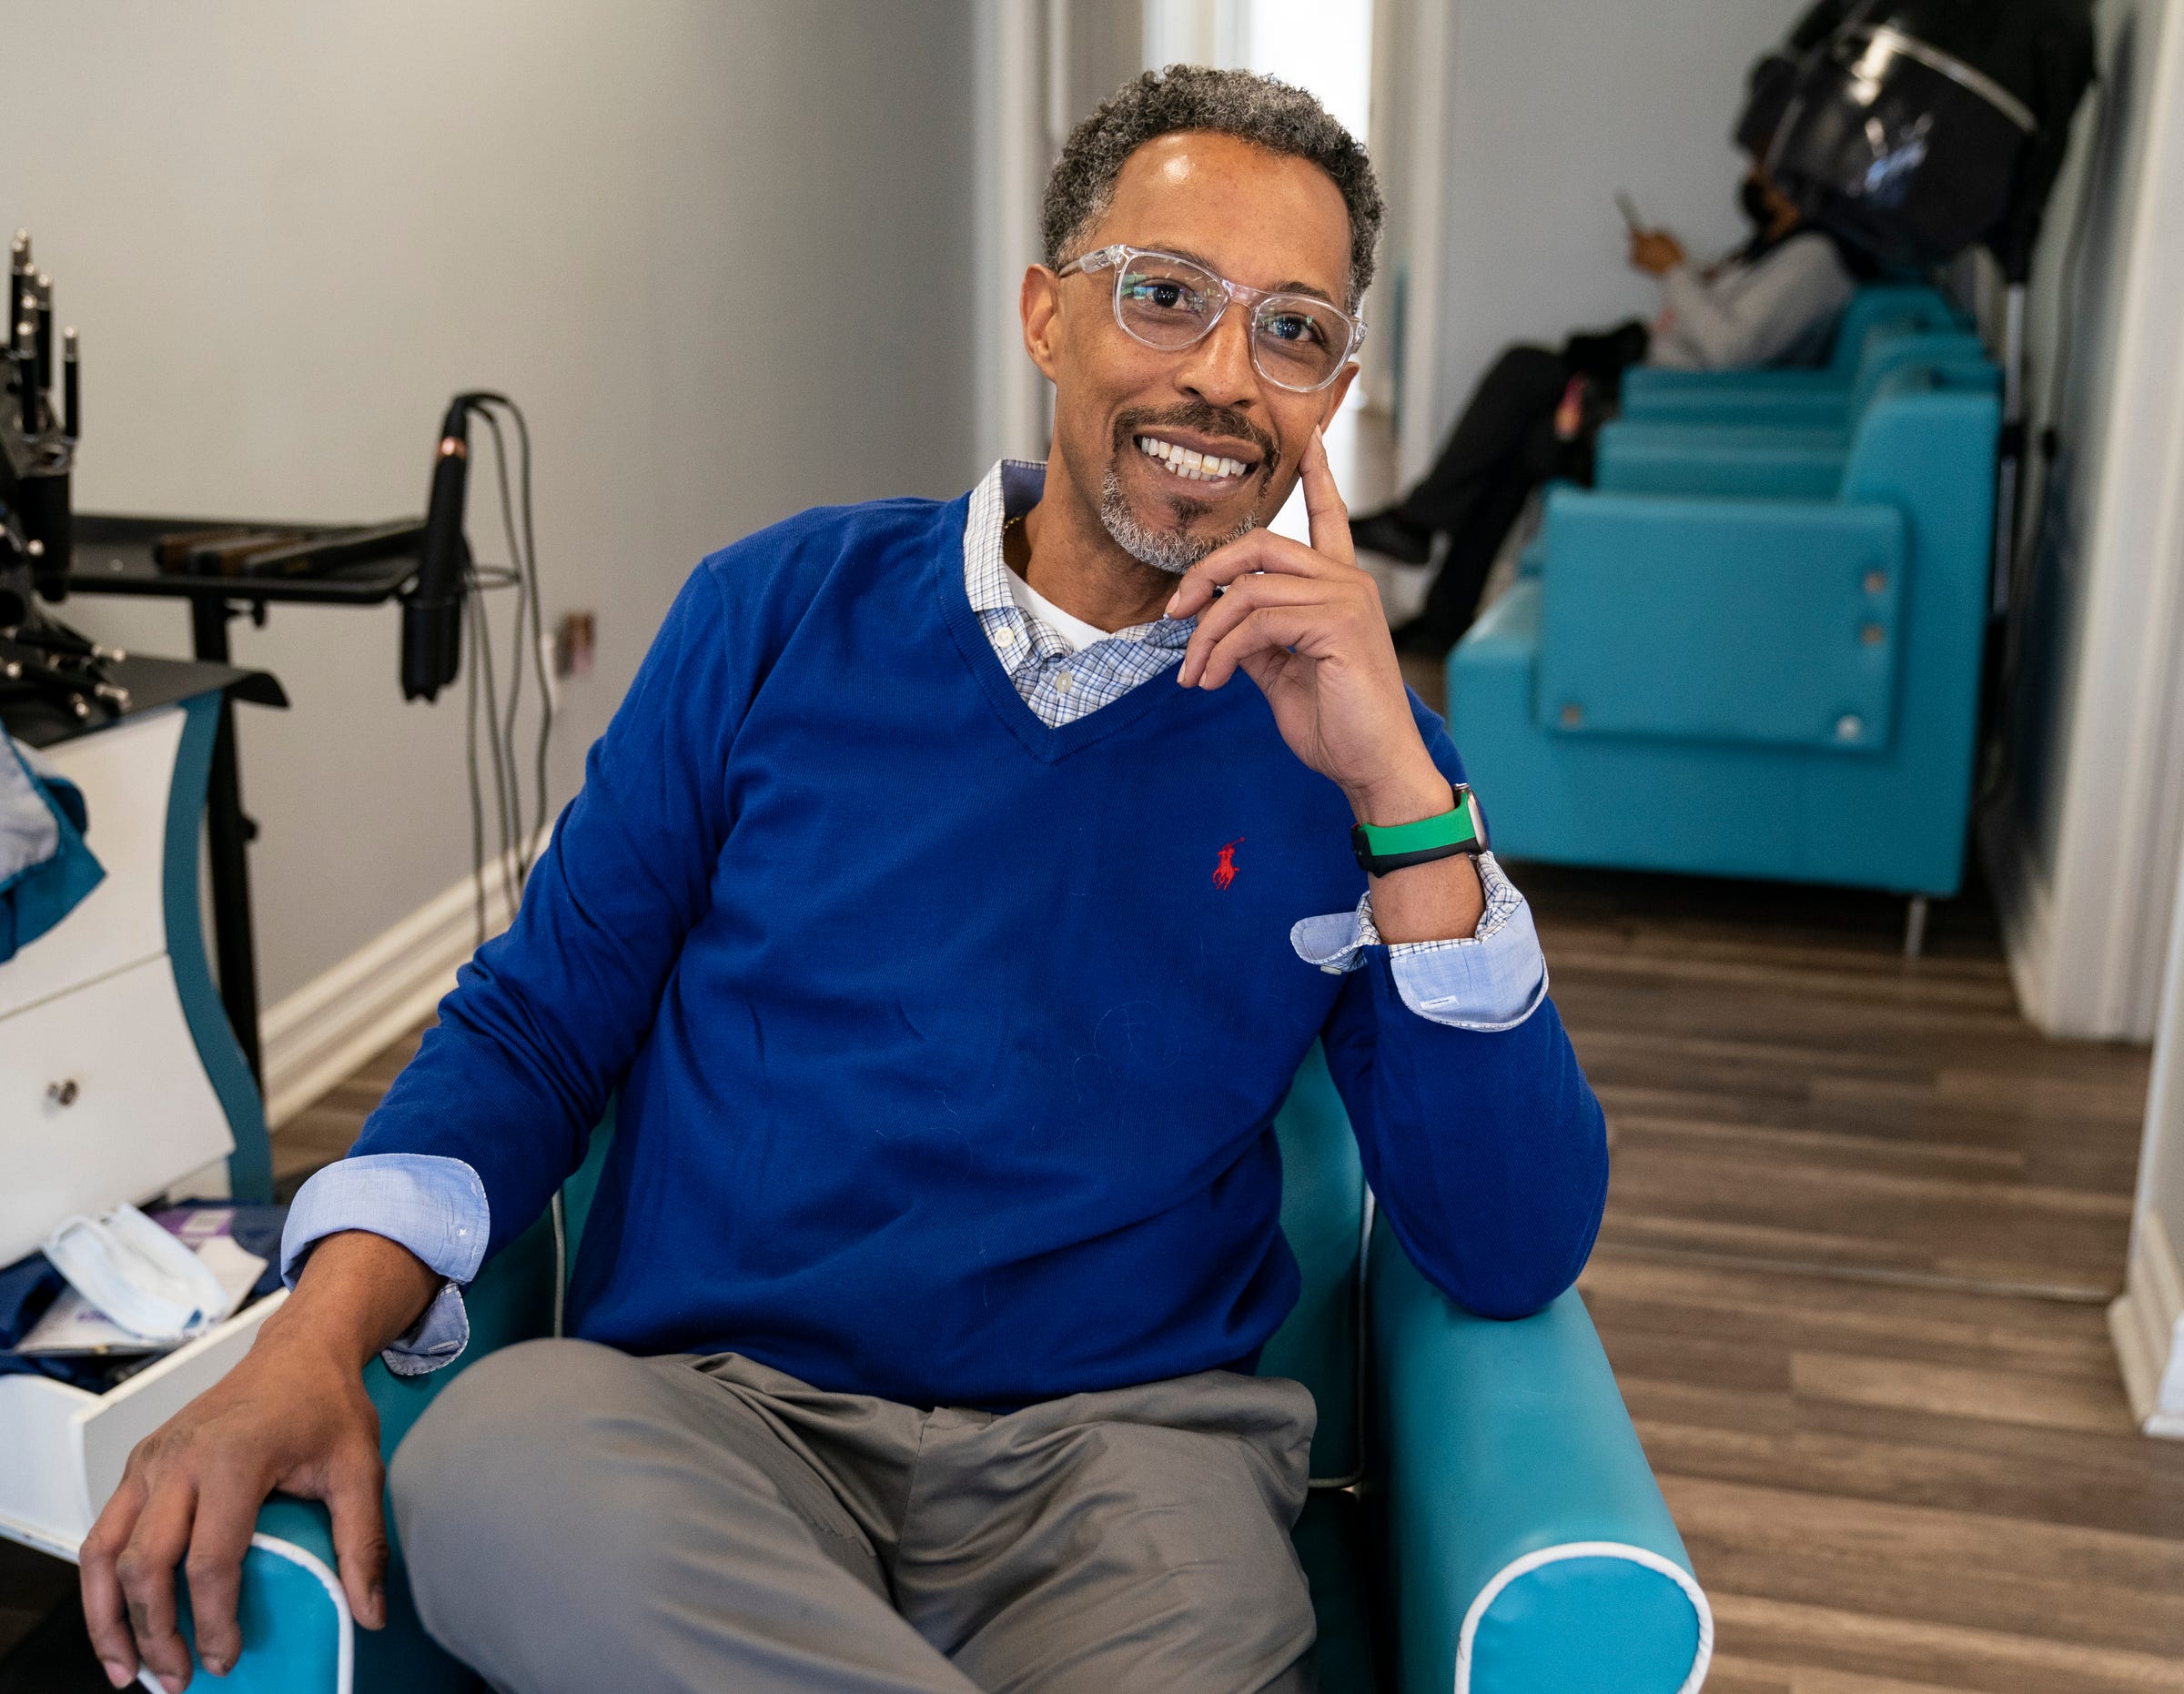 Steven Banks, a former hairdresser for Aretha Franklin, takes a moment to pose for a portrait at Salon Solei in Berkley on Tuesday, March 29, 2022. Banks also respects and celebrates Detroit's hair community, which is known worldwide, and his family, including his mother, were major players in that culture.